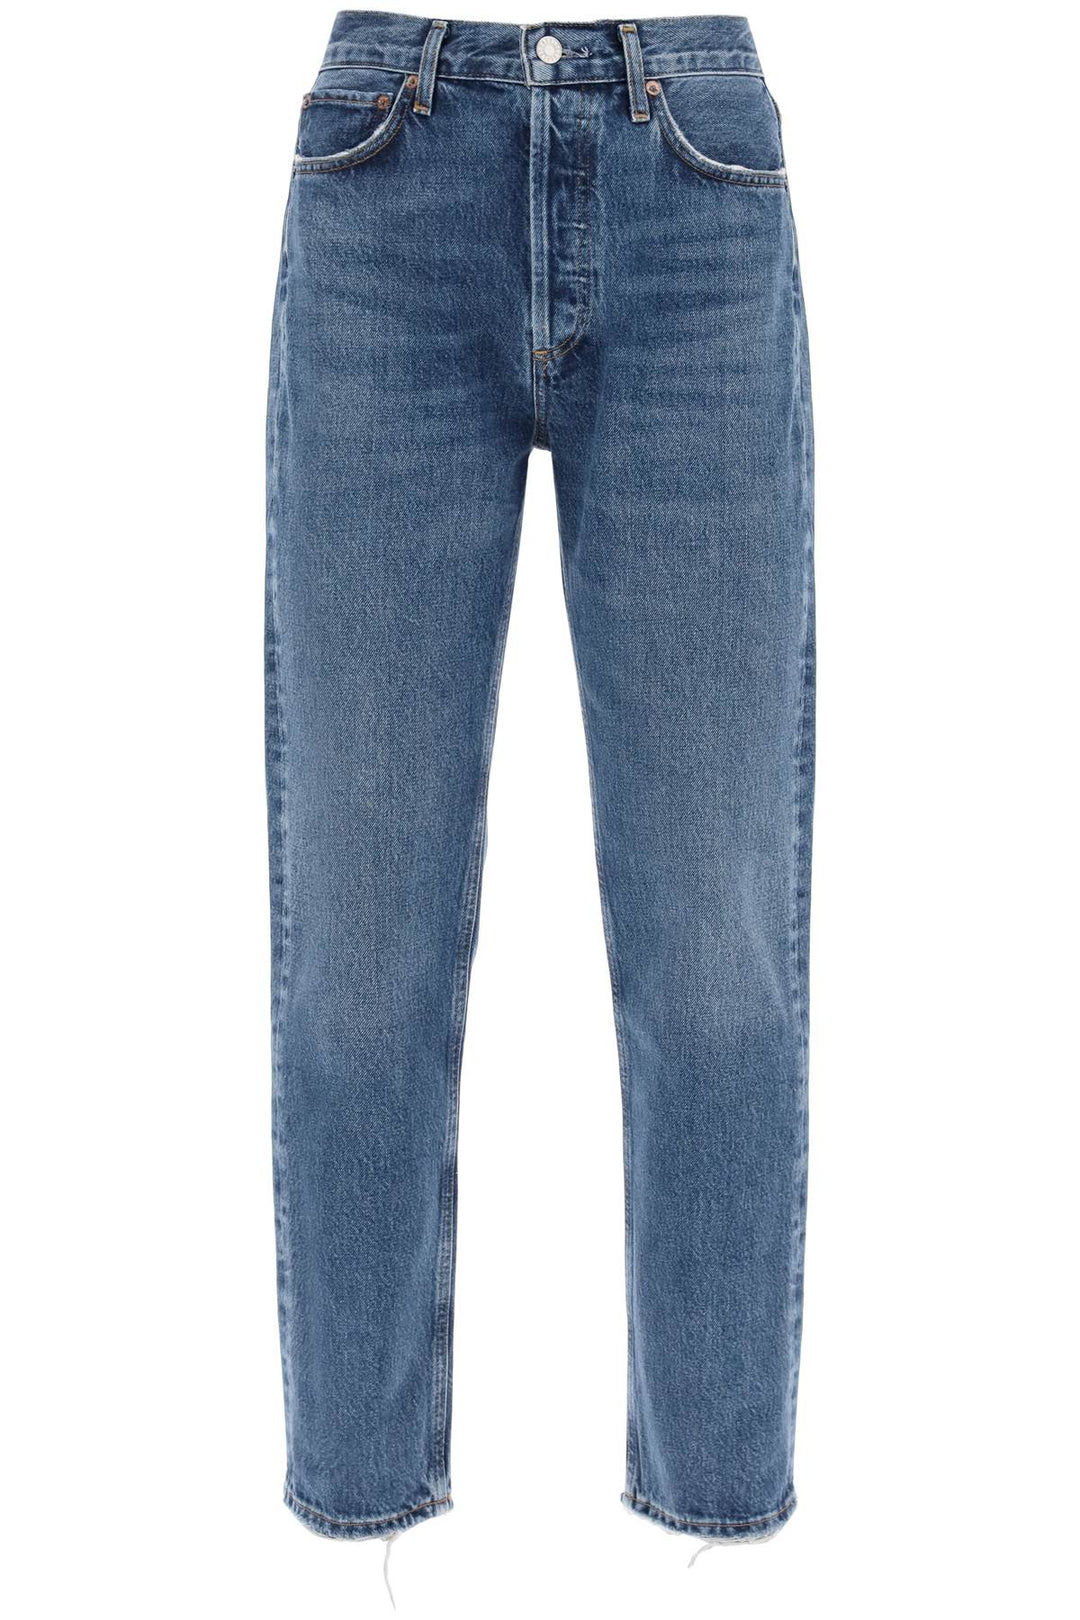 Agolde straight leg jeans from the 90's with high waist-0